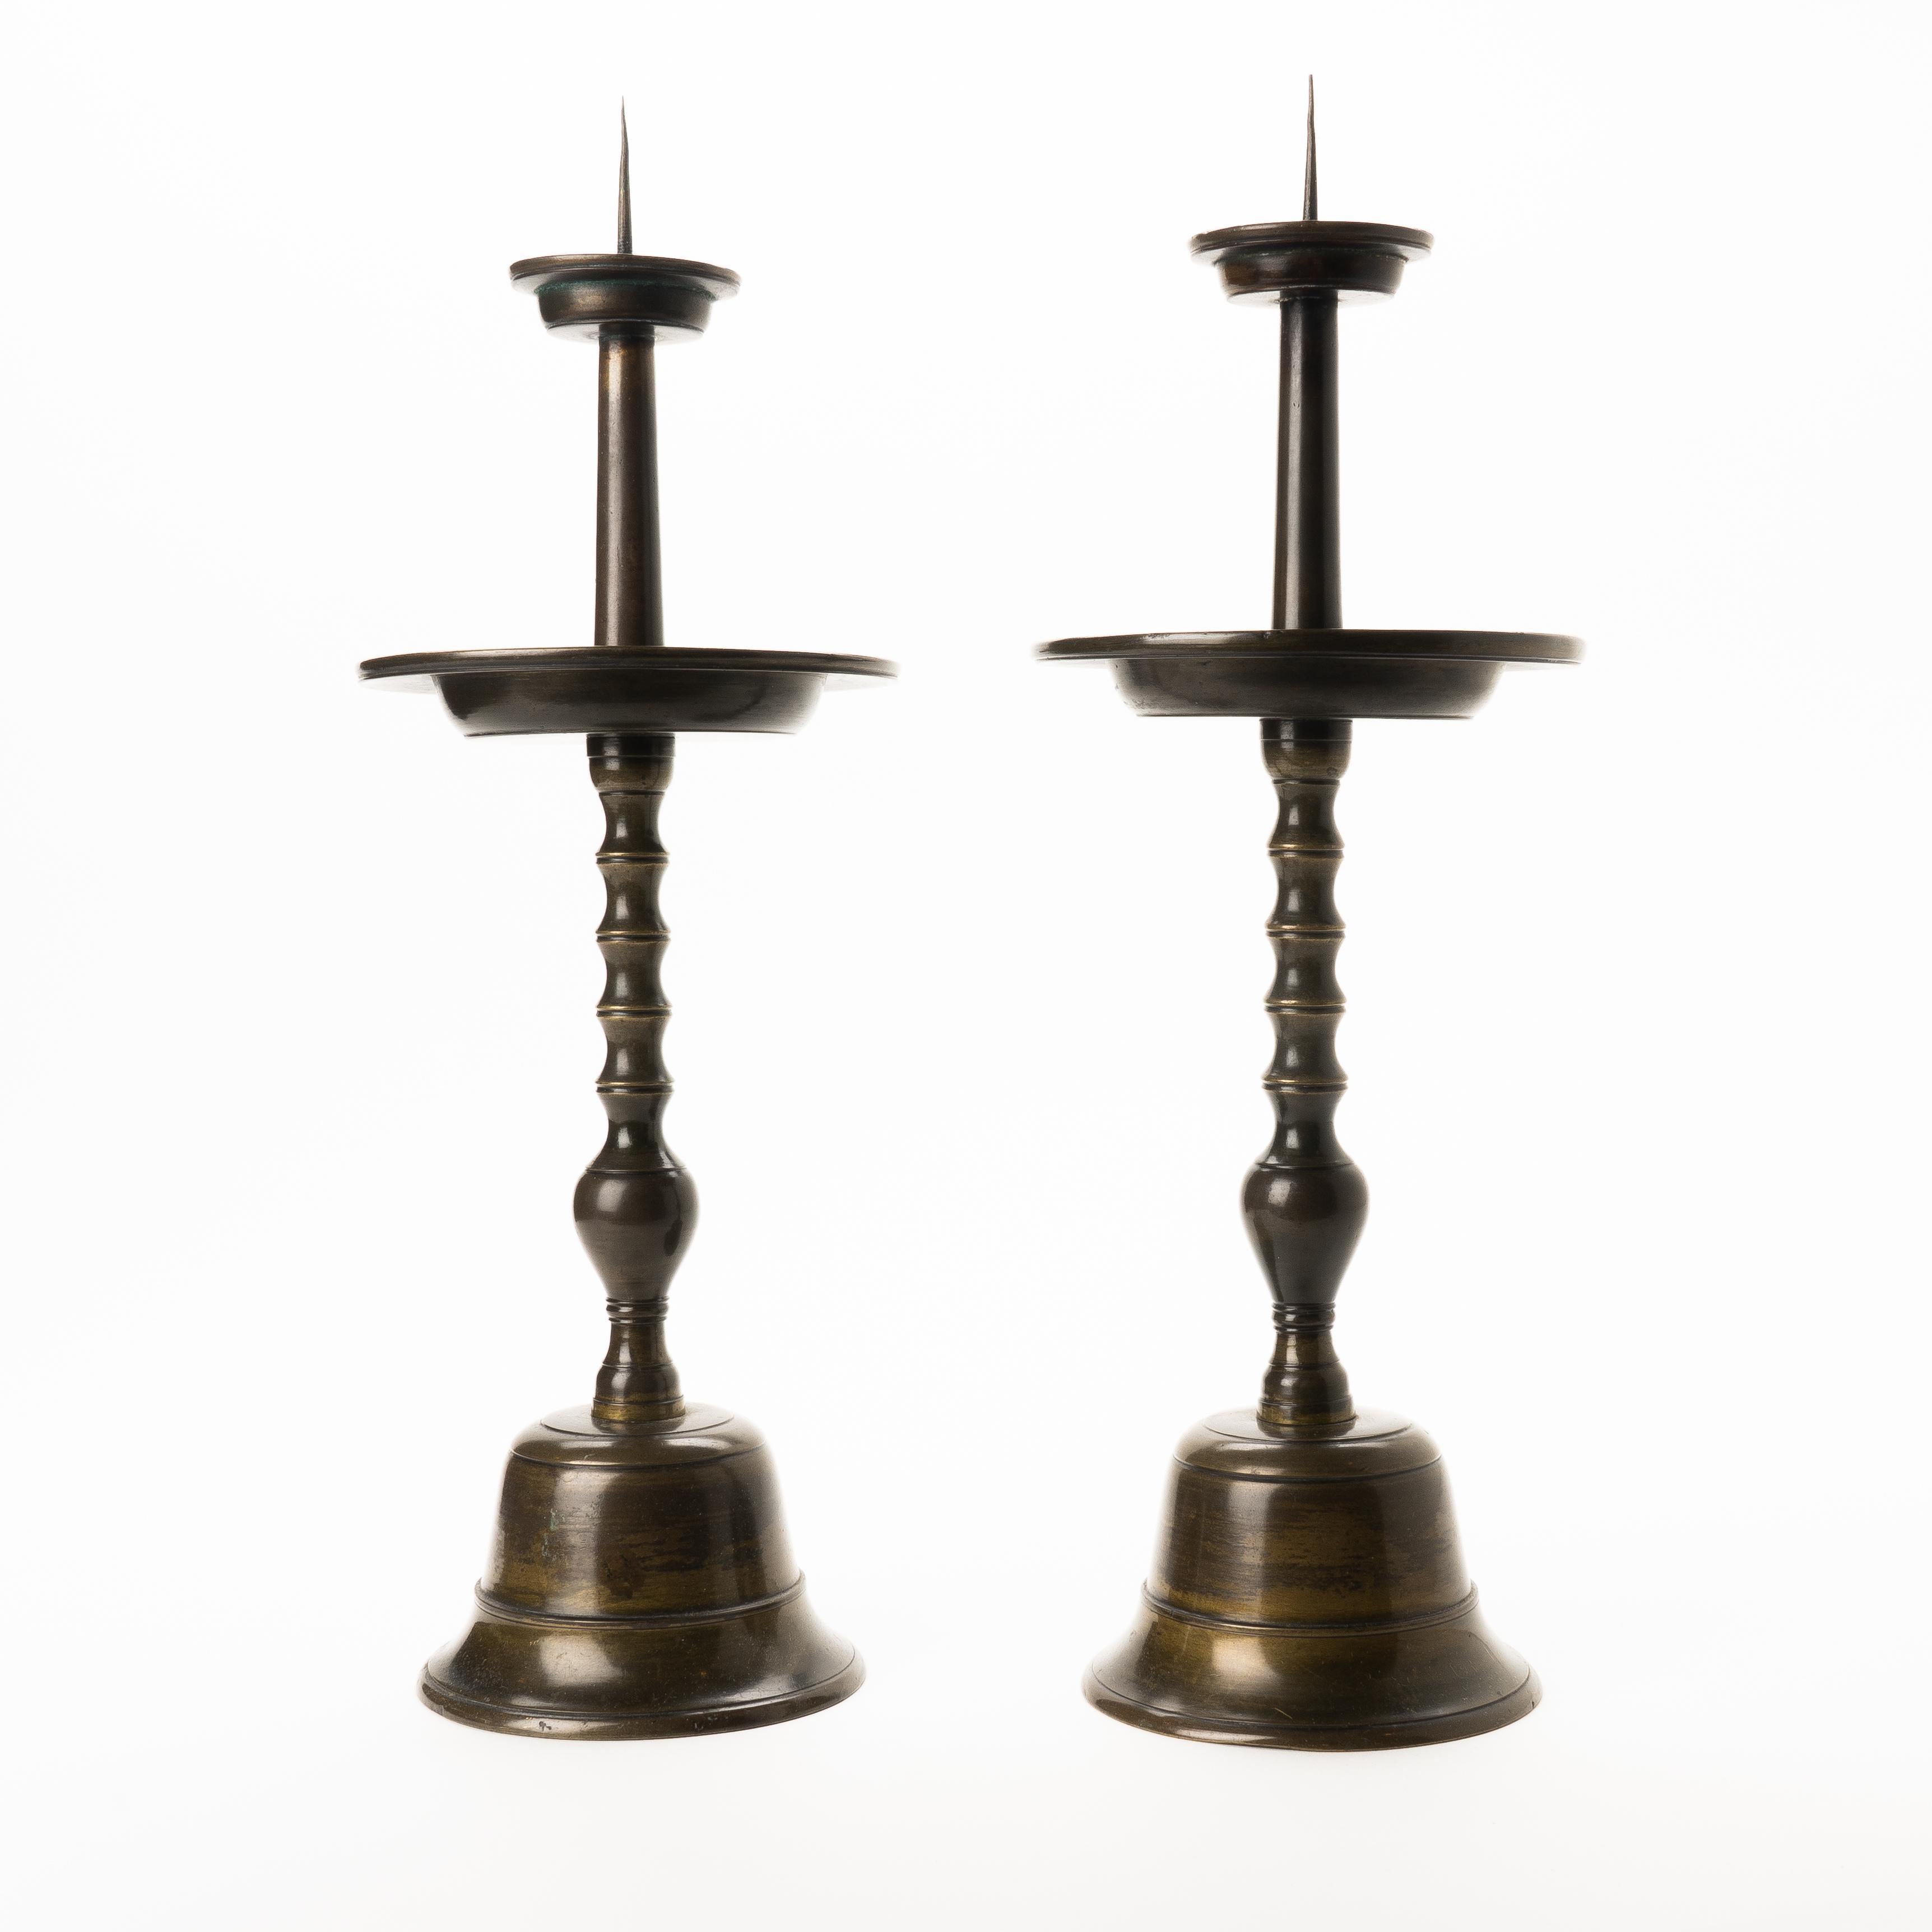 Pair of Japanese cast and patinated bronze altar pricket candle sticks with candle cup above a mid shaft drip pan on a bell shaped base. Cast threaded joinery of the shaft to the base.

Japan, early 20th century.